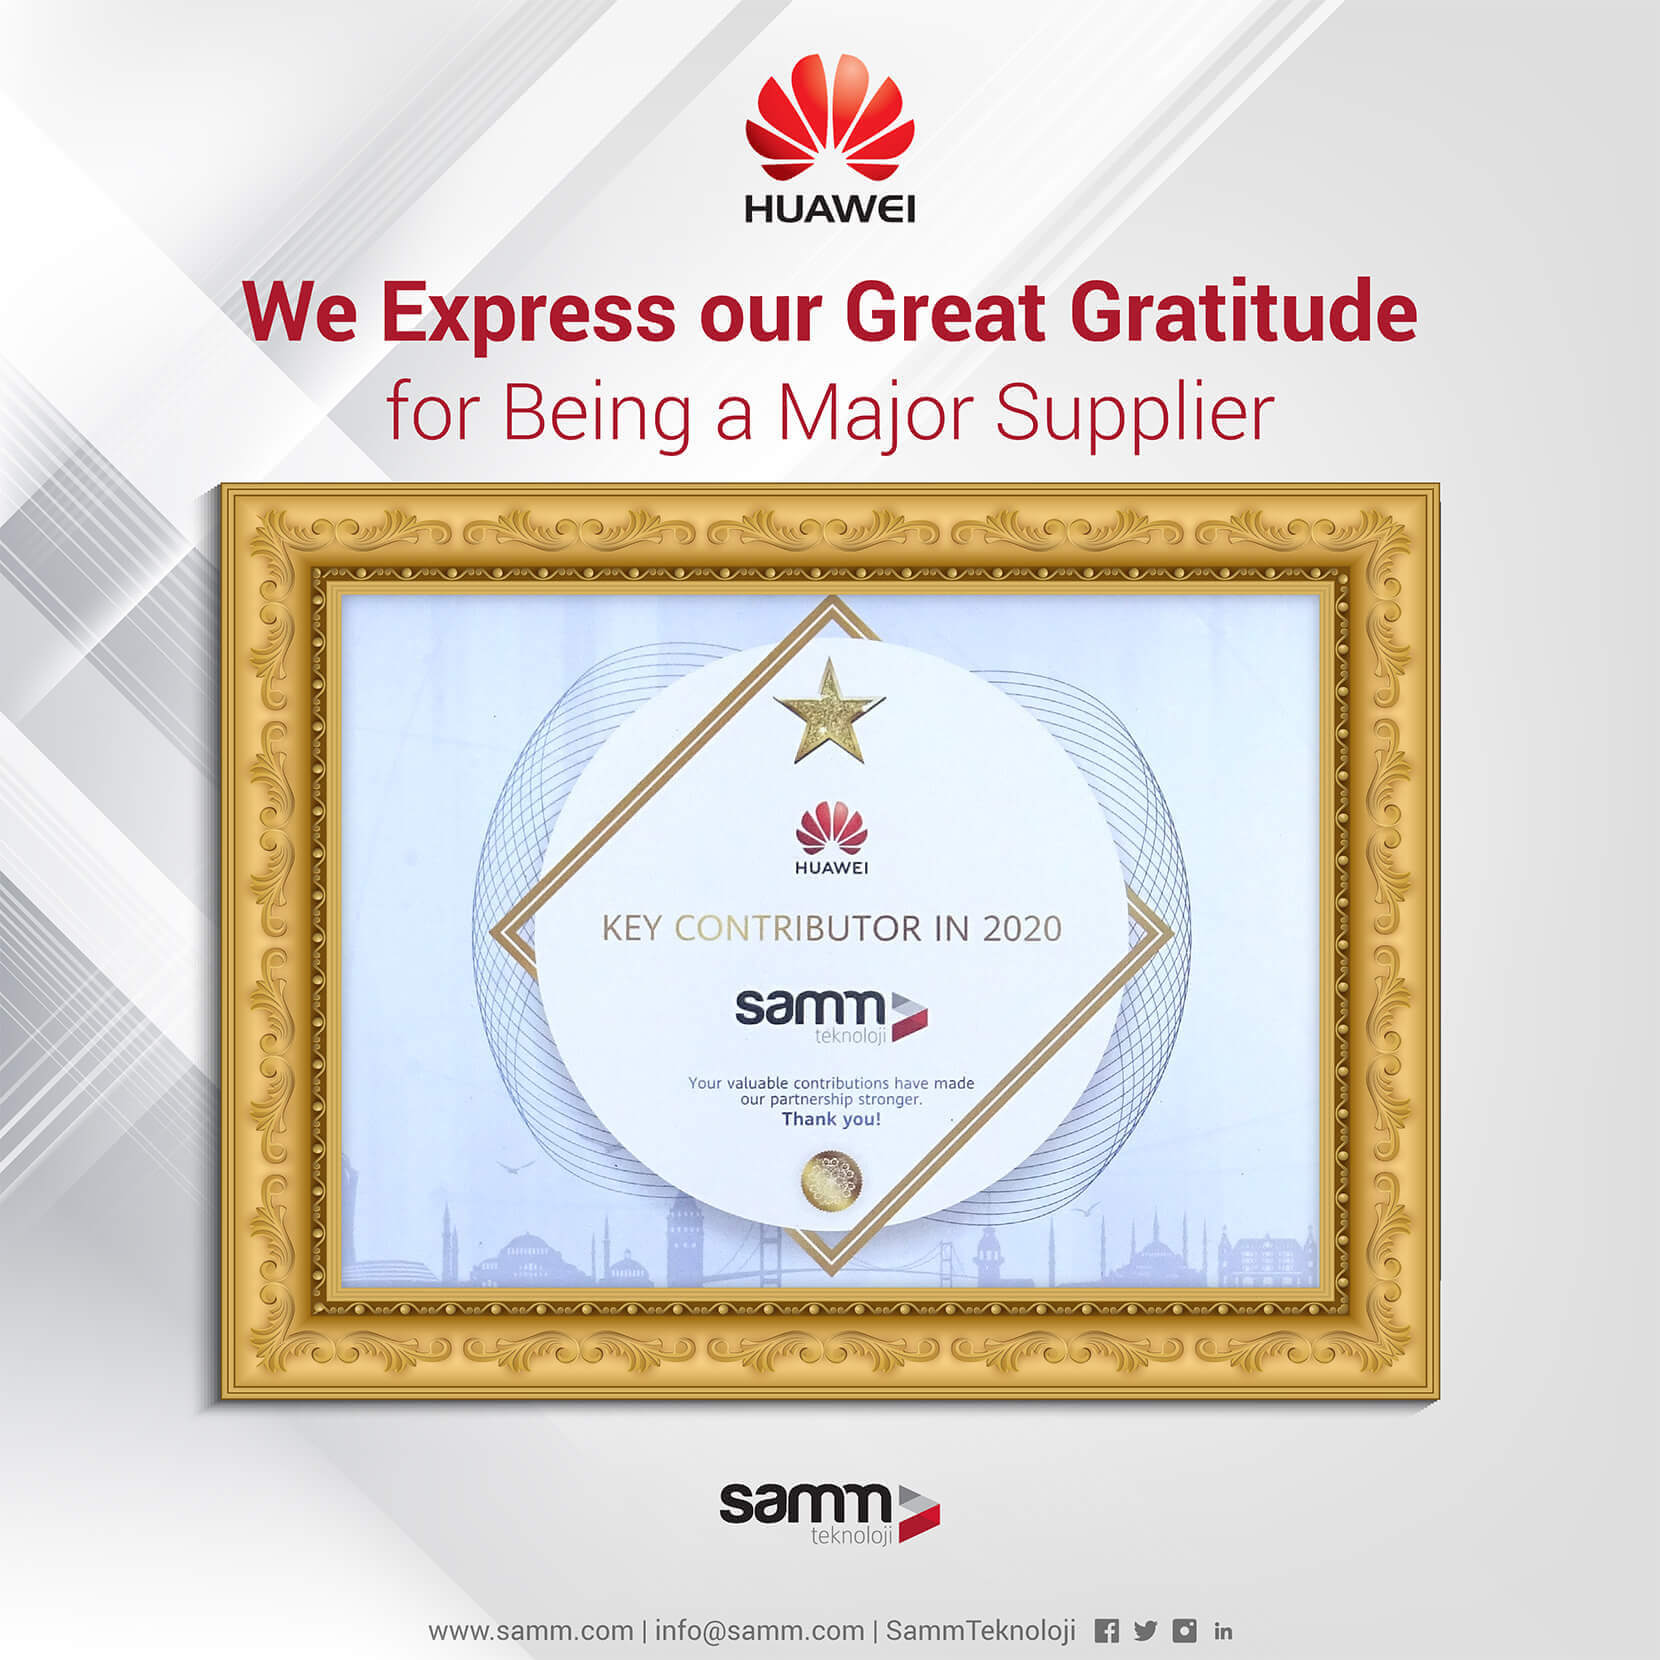 Certificate of Appreciation from Huawei to SAMM